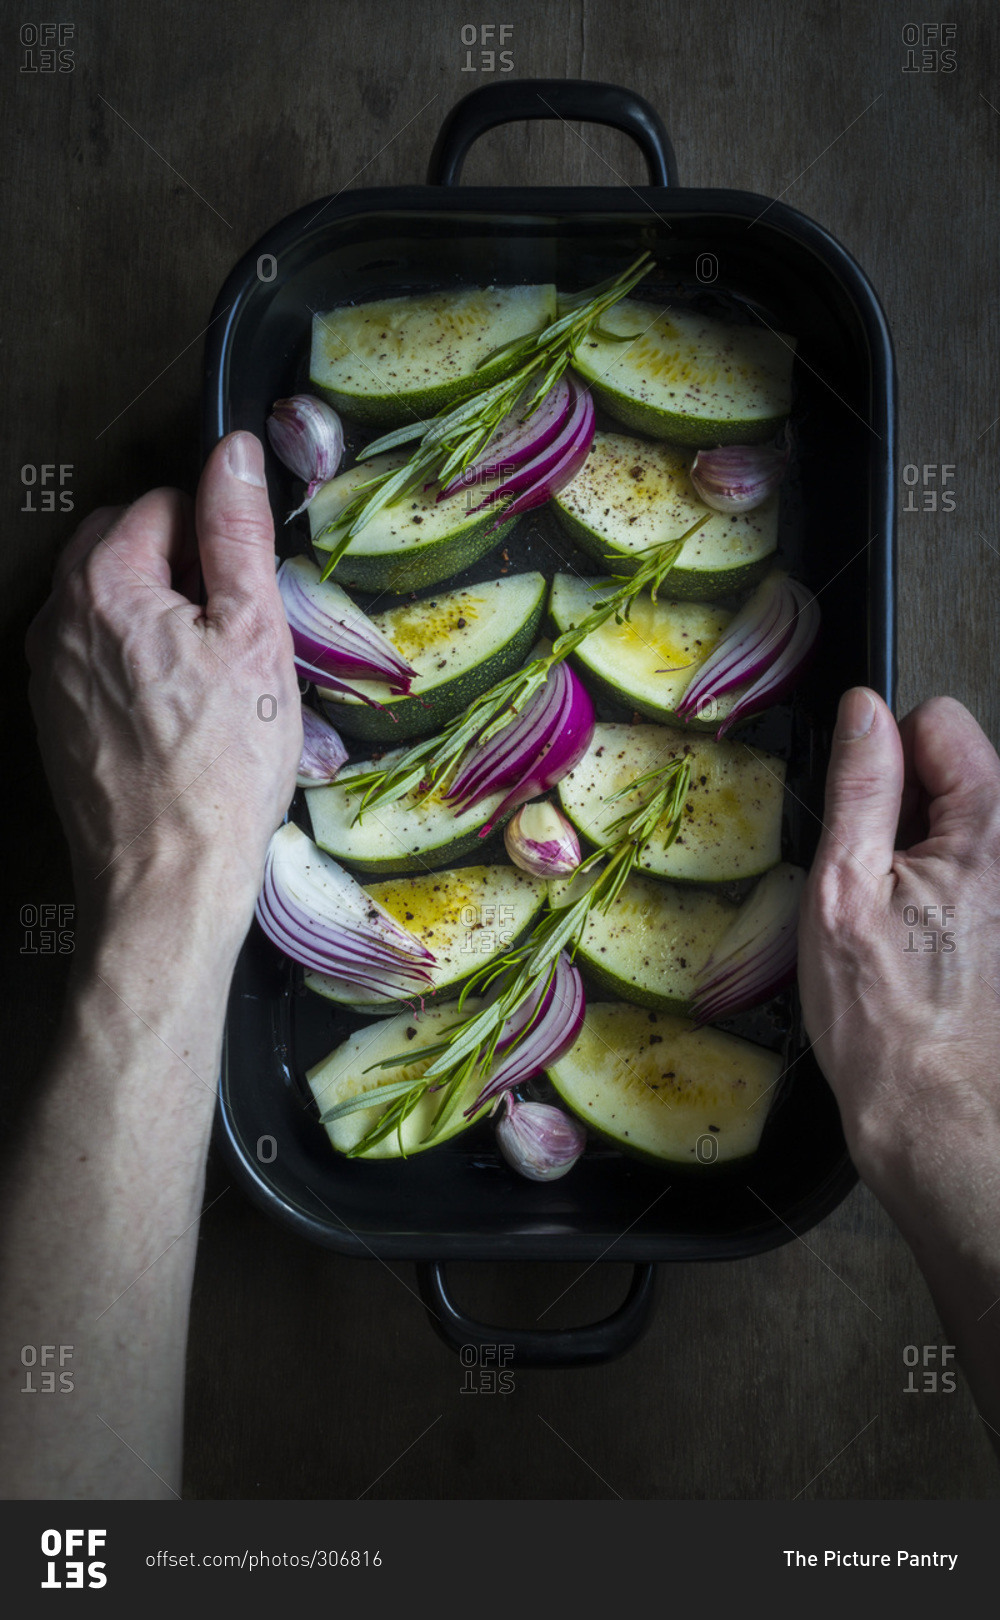 Hands holding an oven dish with courgette, onions and fresh herbs prepared for cooking